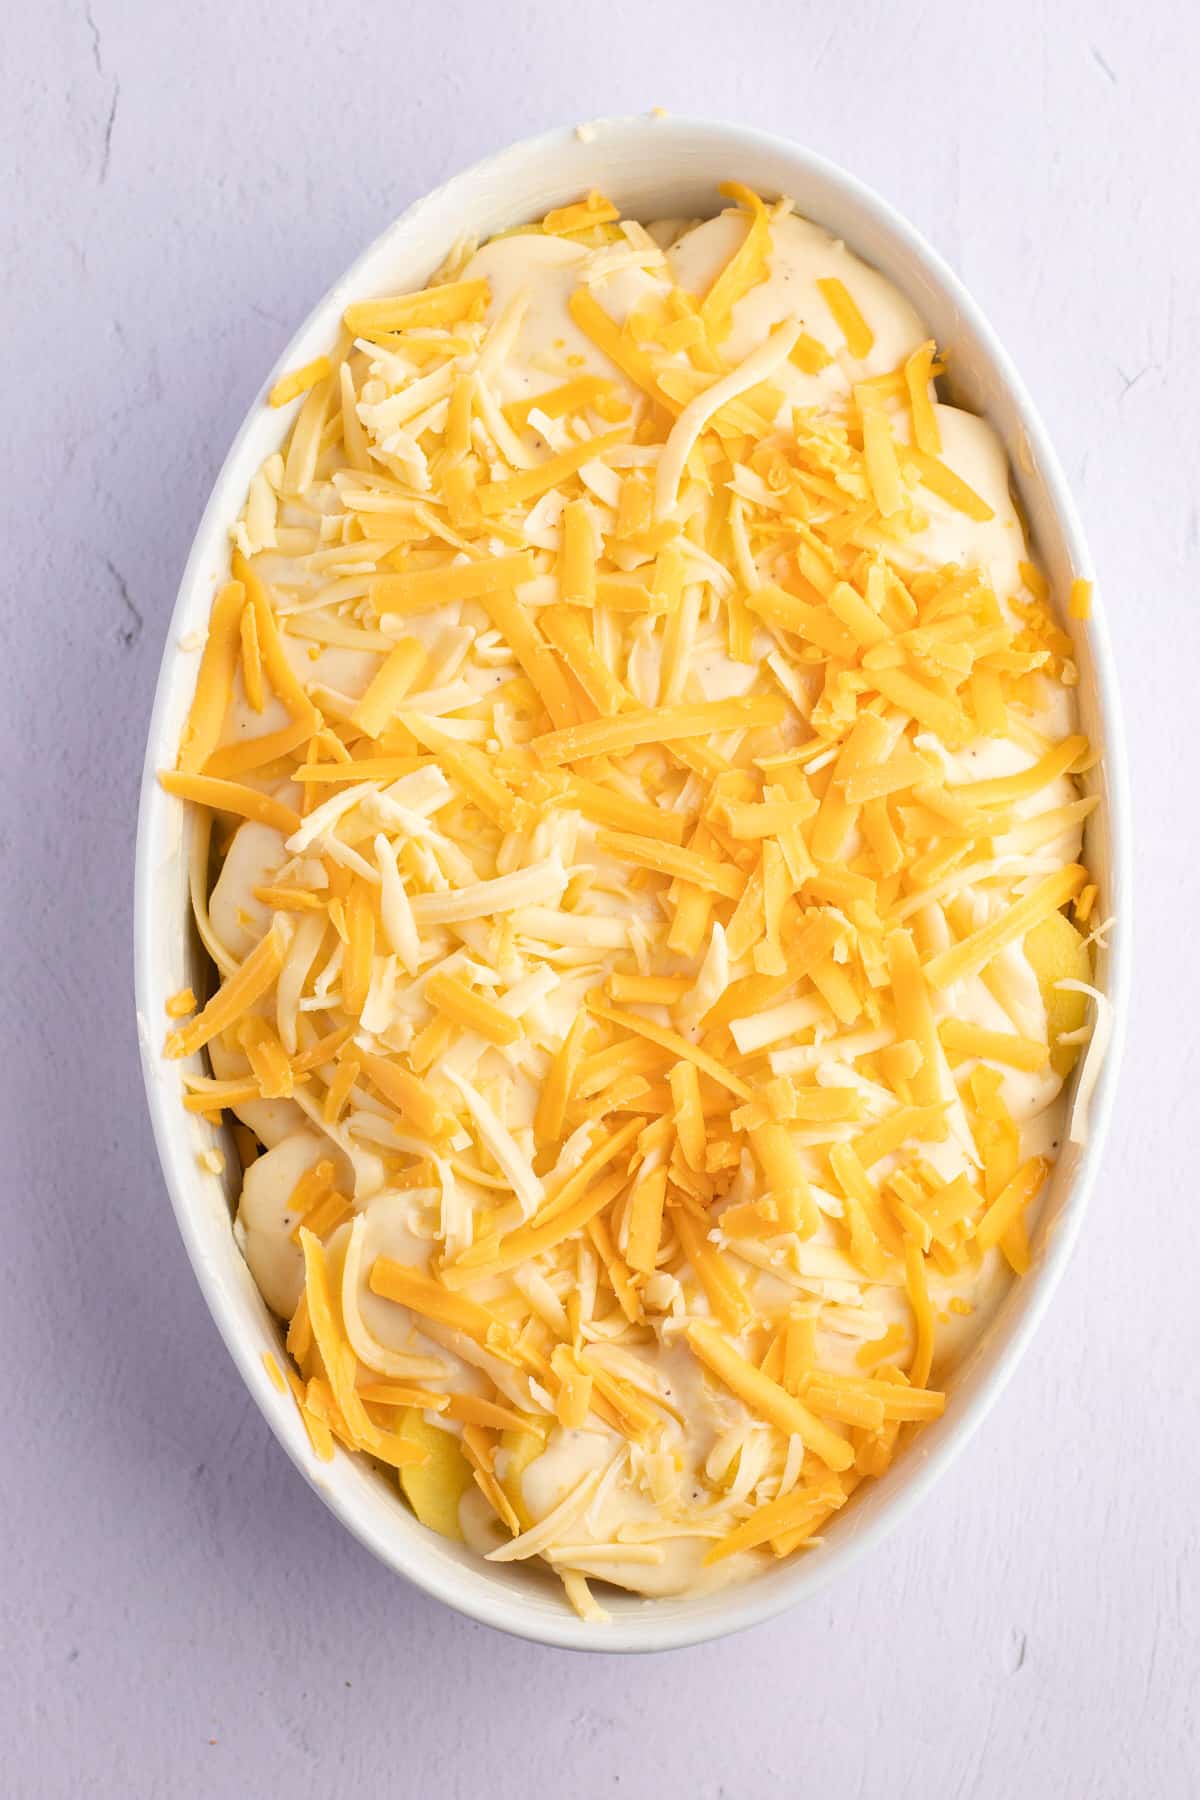 Shredded cheese placed on top of the cram and potatoes.